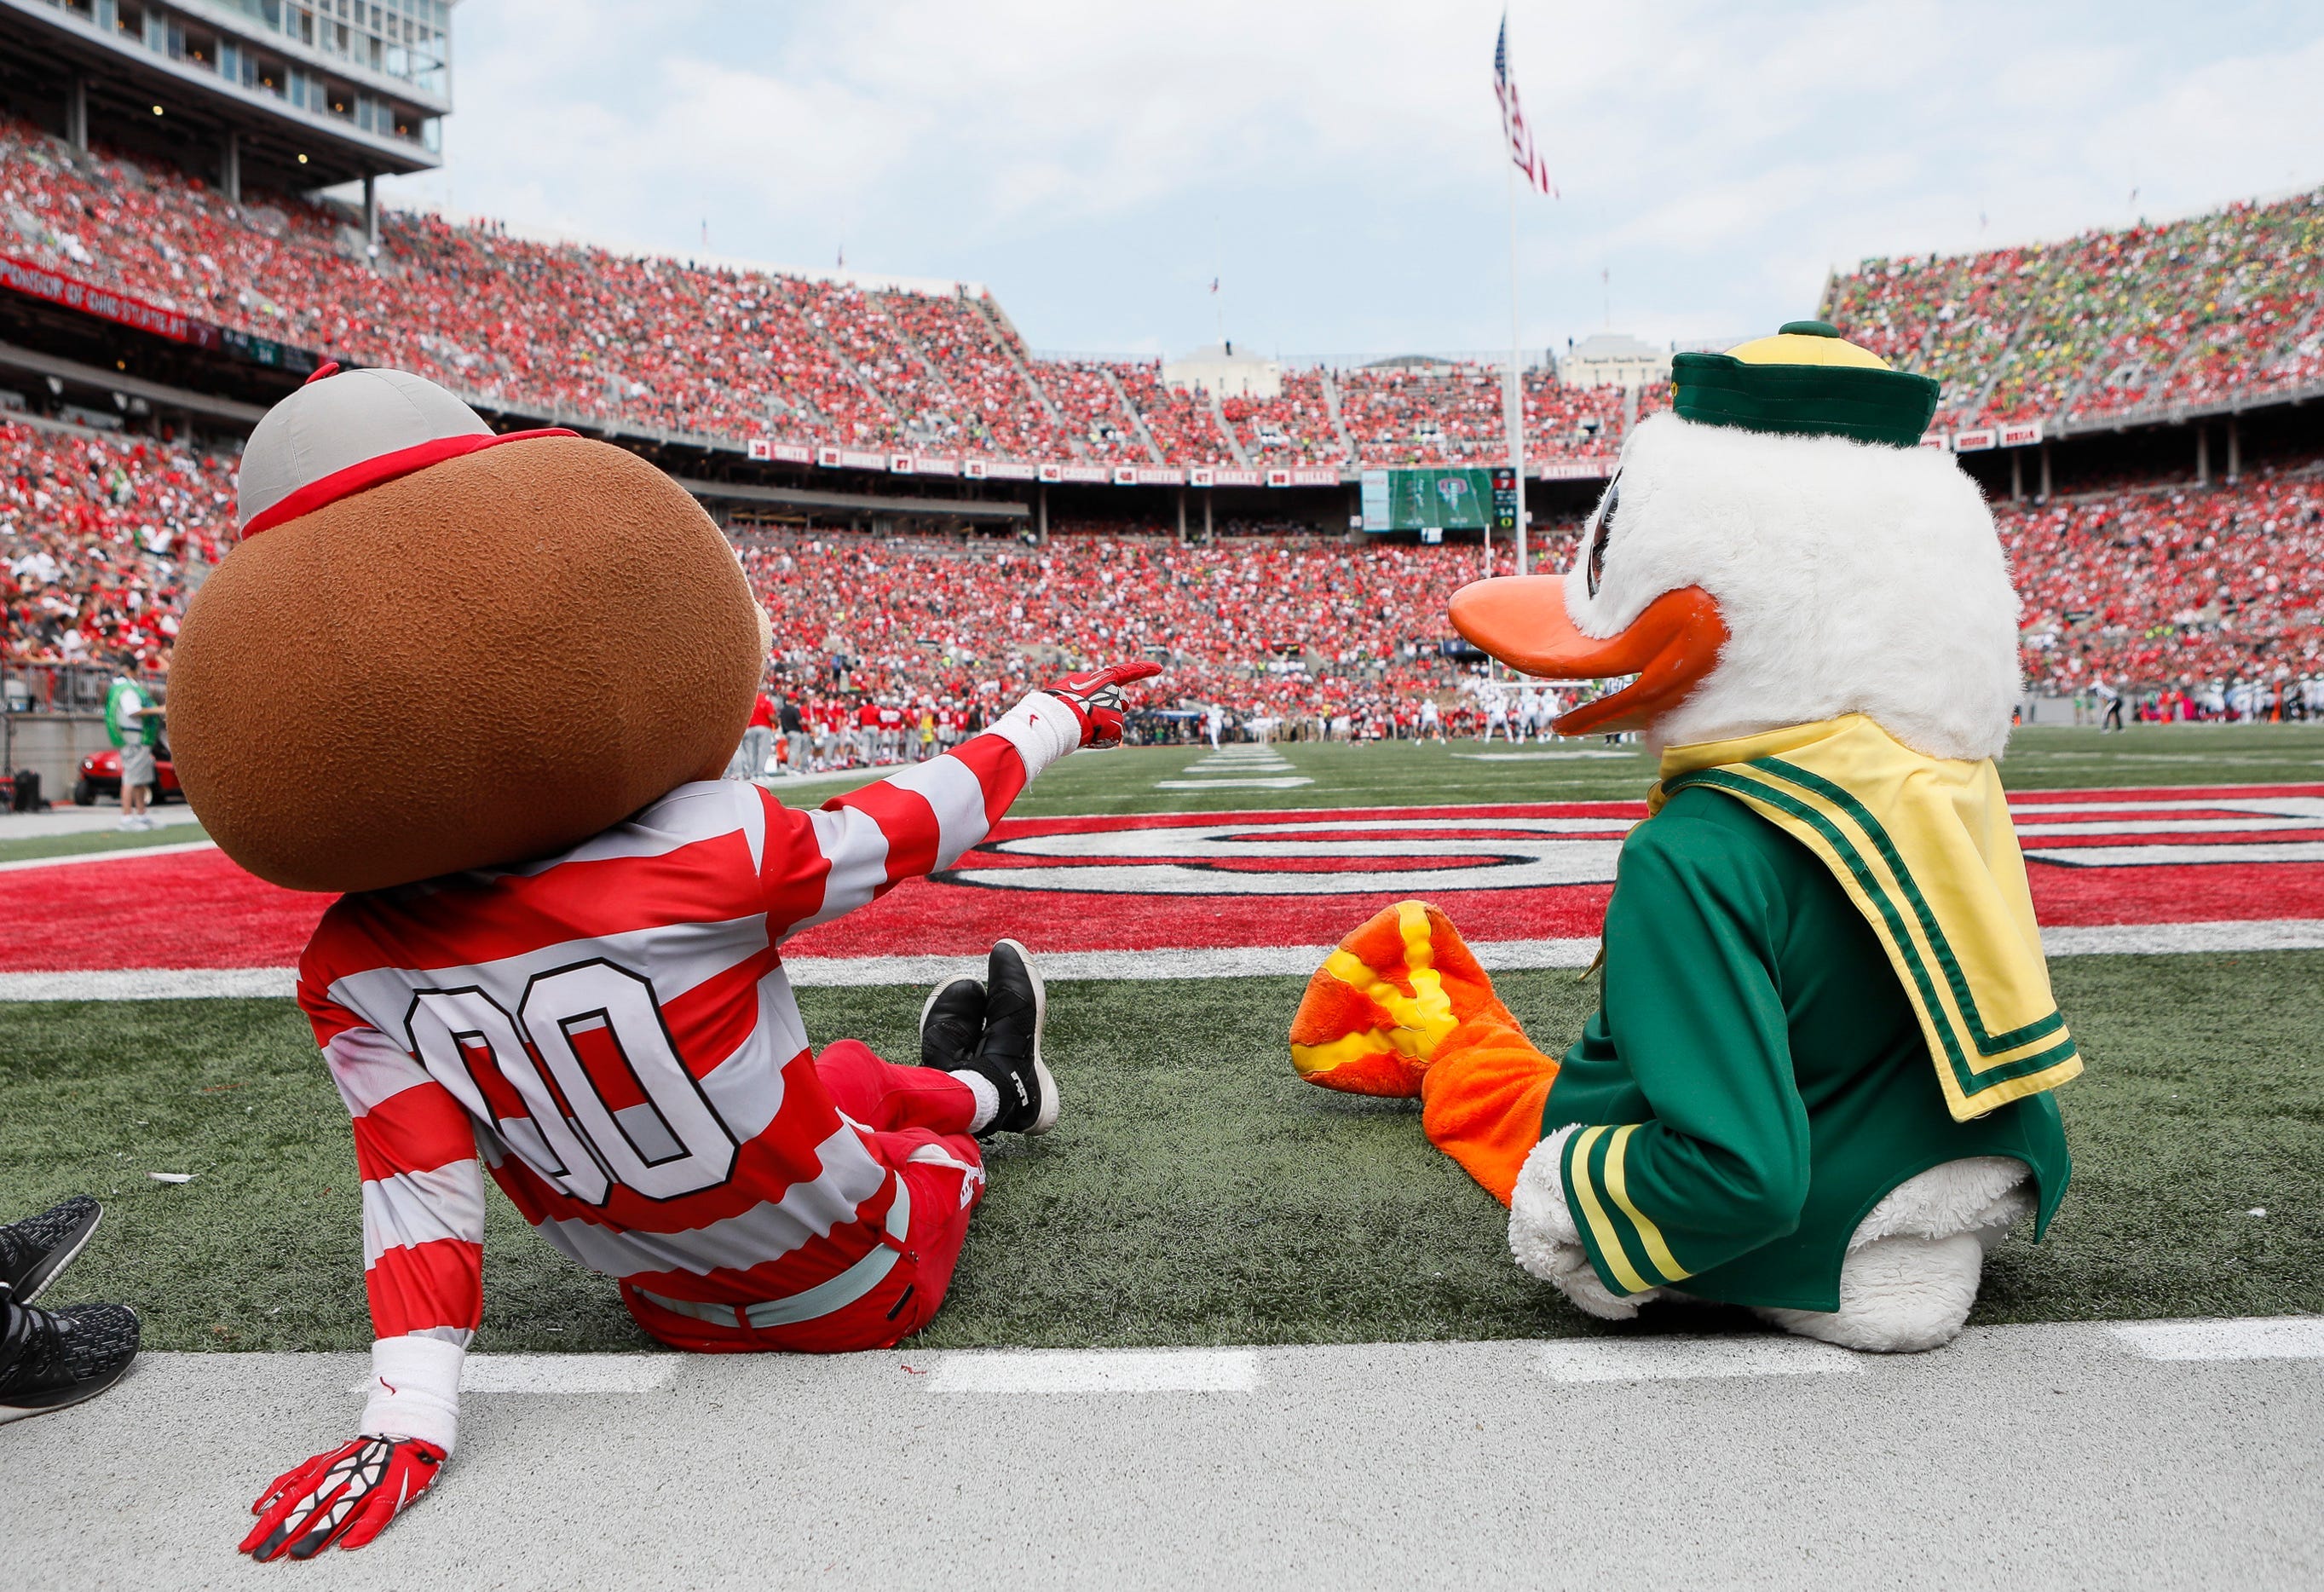 oregon vs. ohio state named as one of most intriguing matchups in new-look cfb era